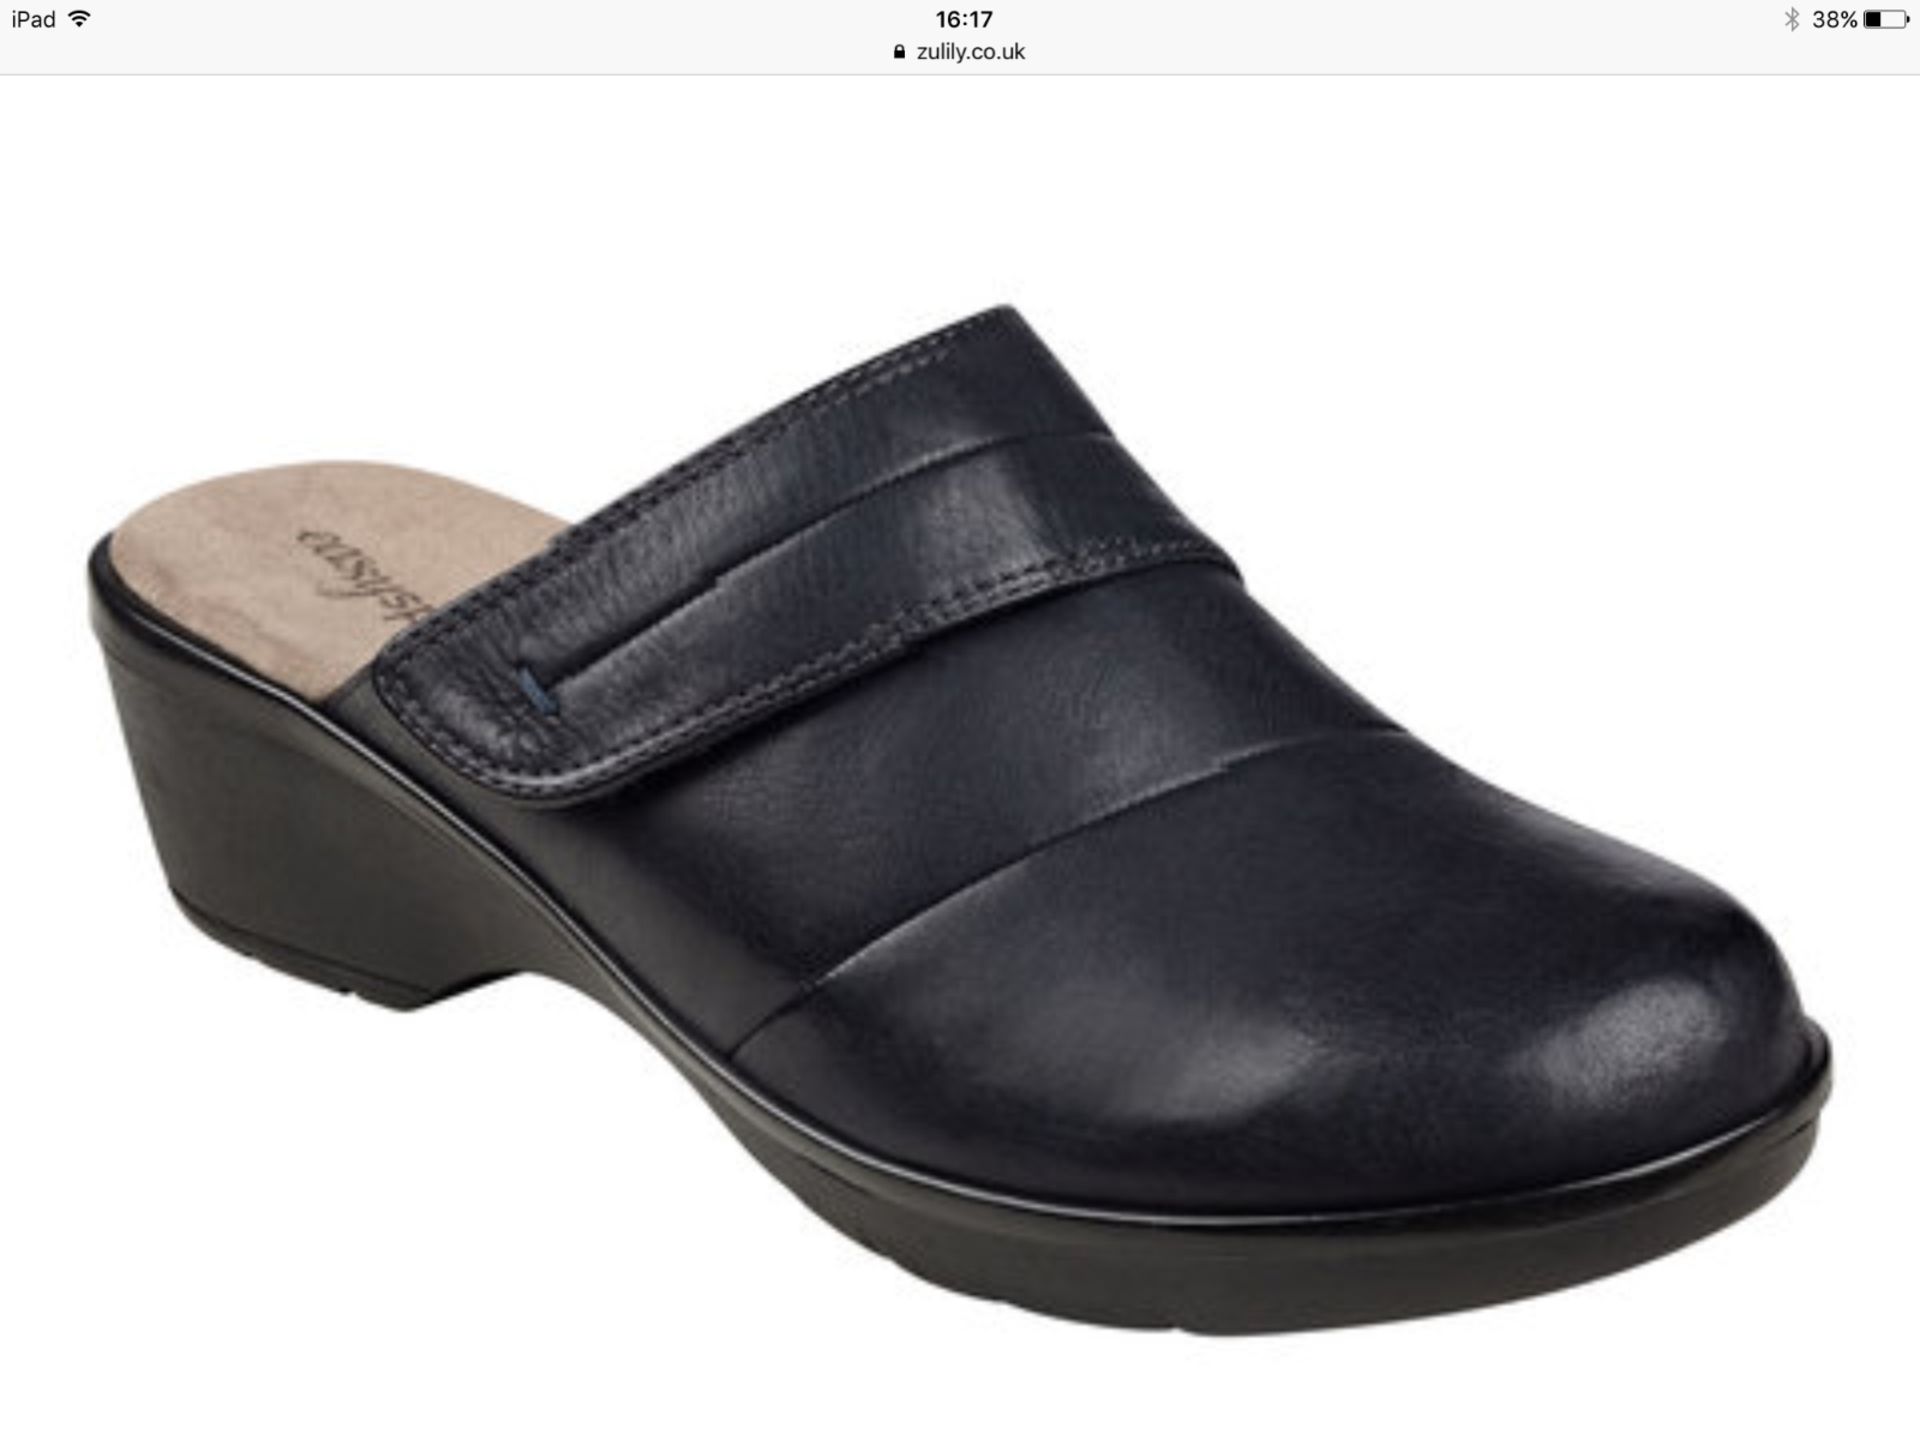 Easy Spirit Navy Pallen Leather Clog, Size Eur 37 (New with box) - Image 2 of 4